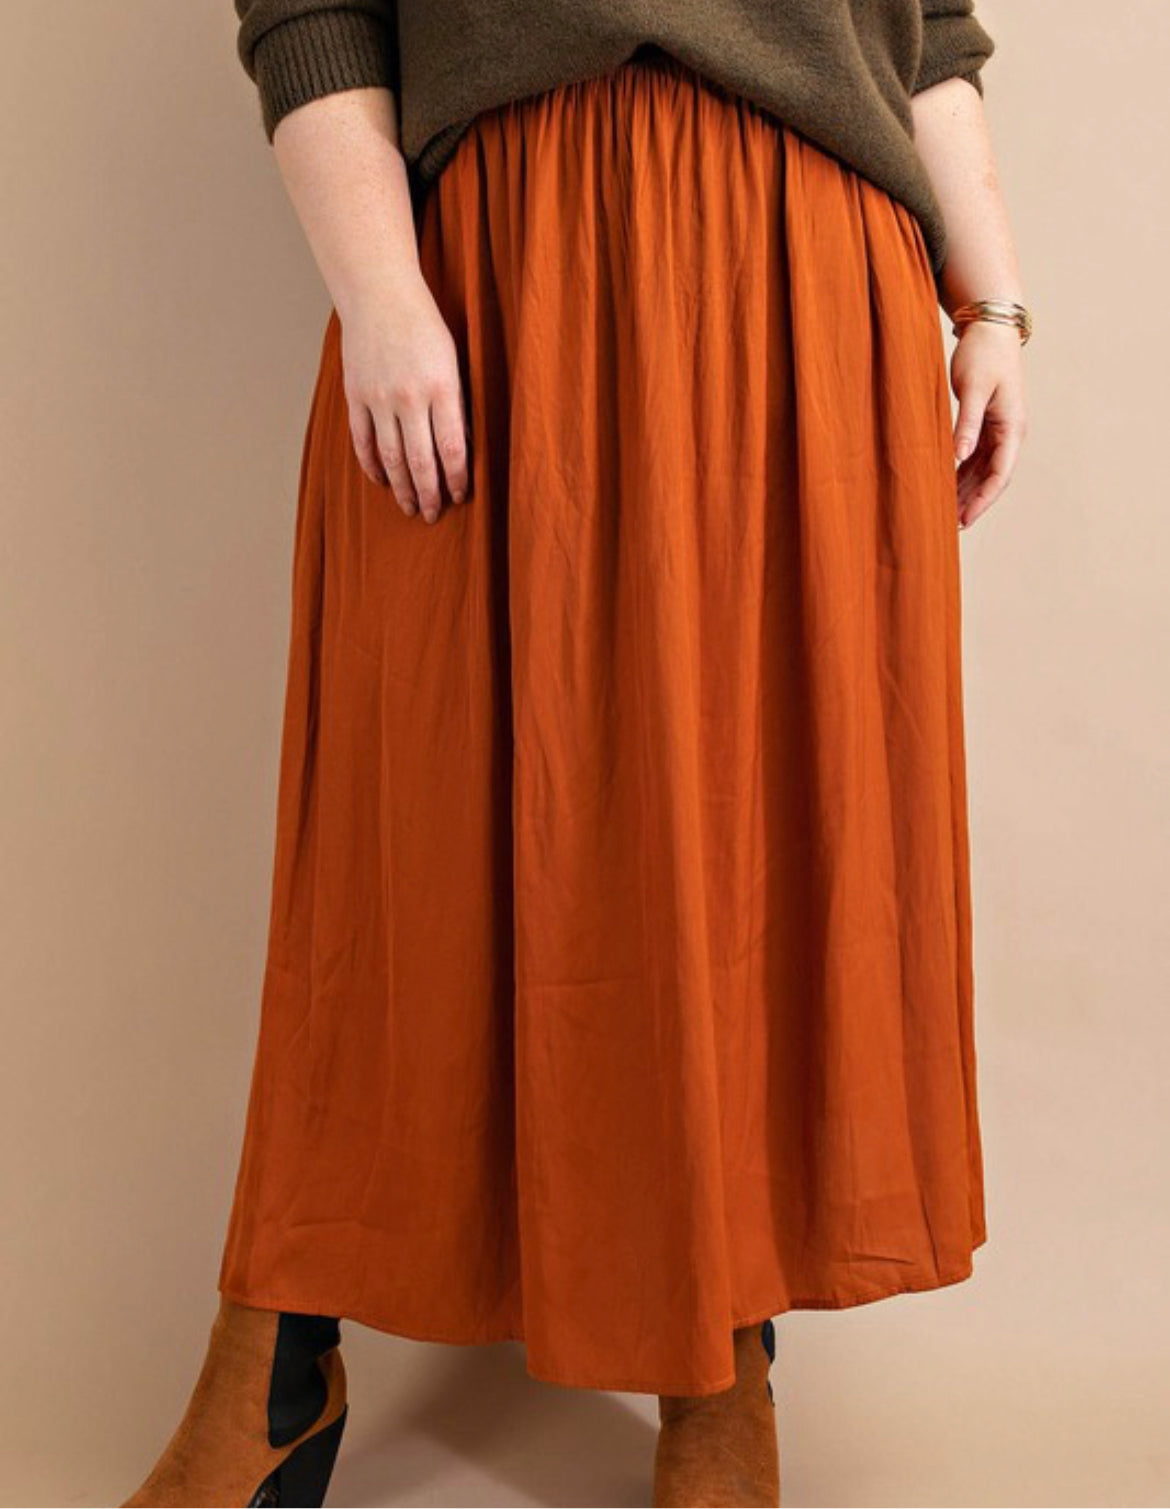 THANKFUL FOR YOU SKIRT - RUST (SIZES S - 2X)